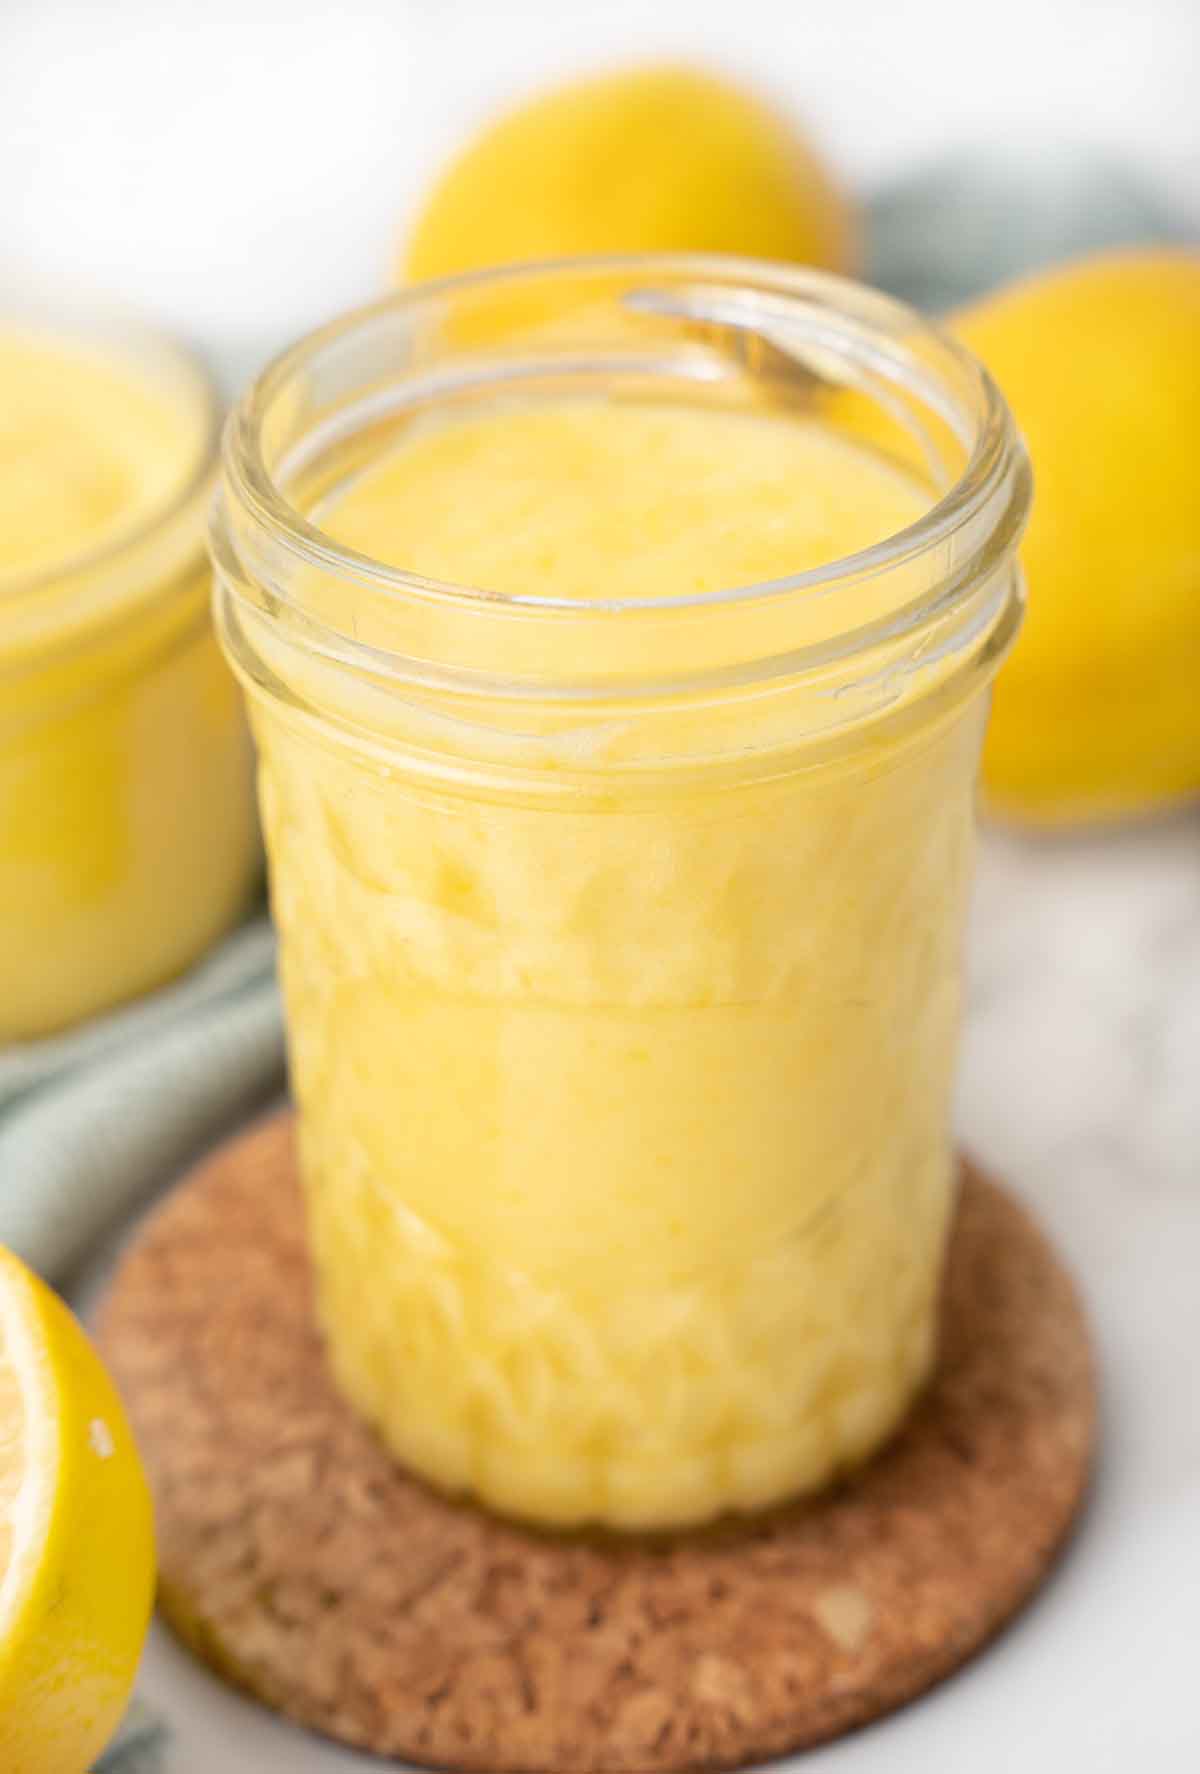 jar of lemon curd, with lemons and another jar in the background.